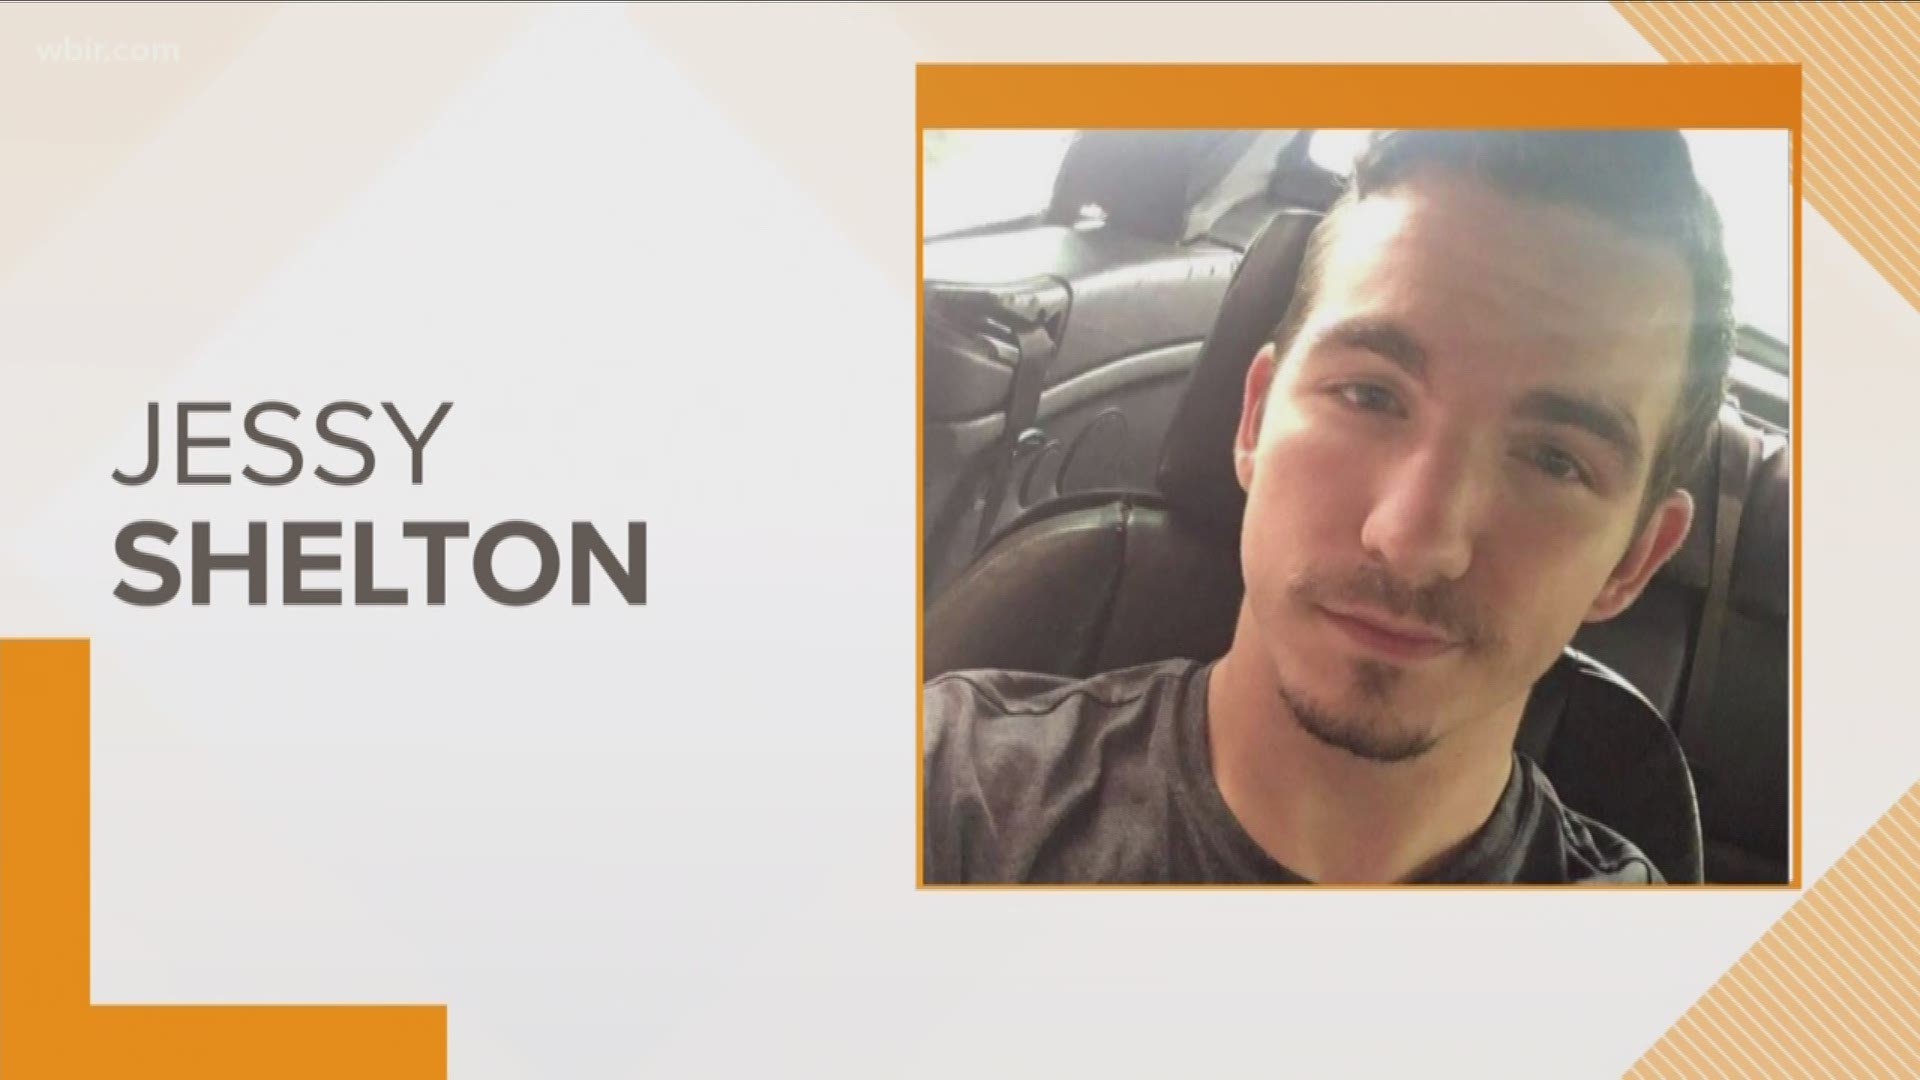 A missing man from Powell has been found safe. The Knox County Sheriff's Office thanked the public for its help finding Jessy Shelton.